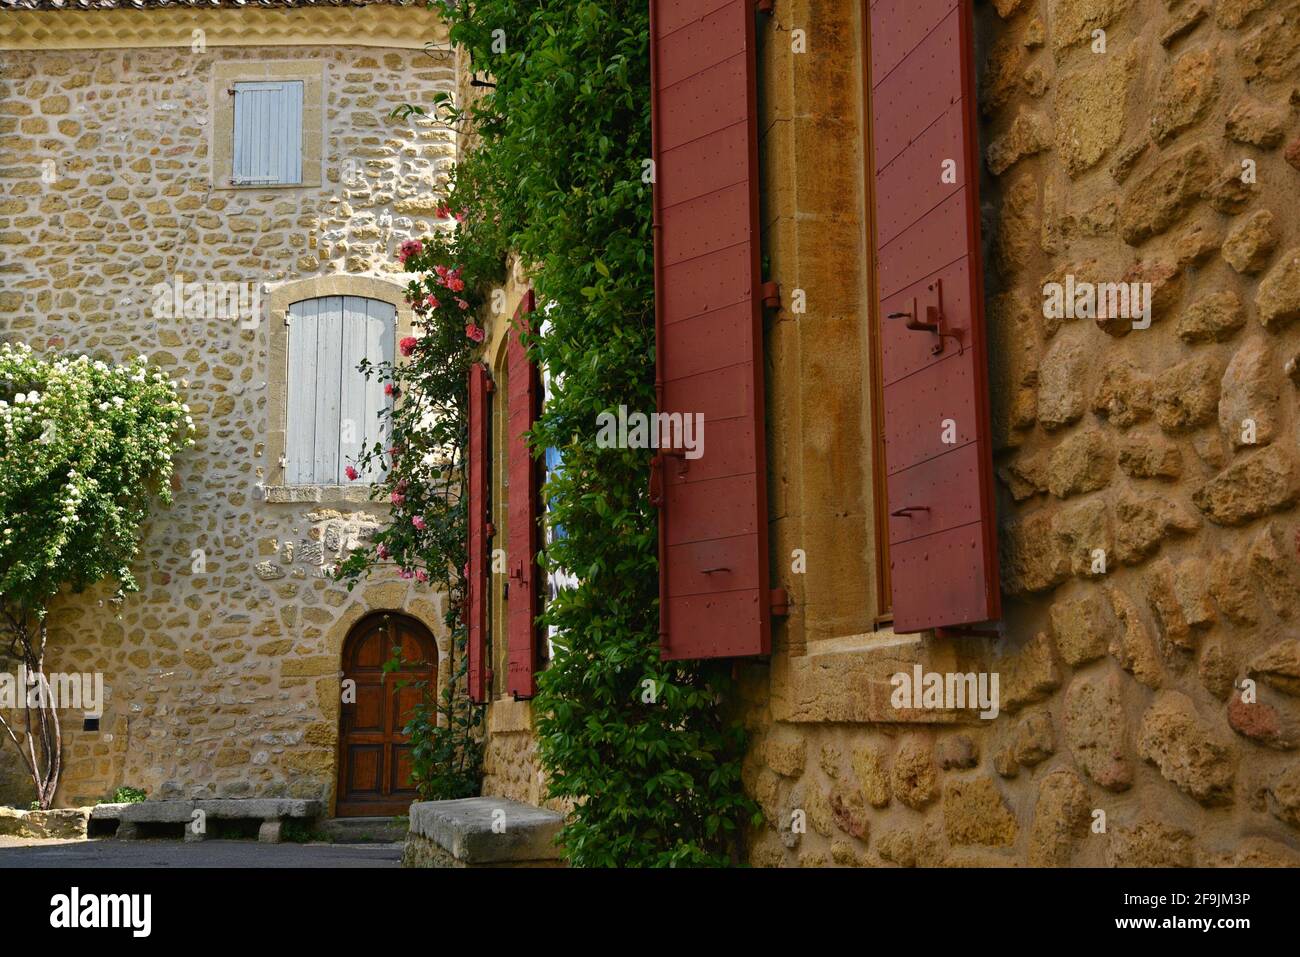 Typical Provençal style rural house stone facade with red wooden shutters in the picturesque village of Lourmarin in Vaucluse, Provence France. Stock Photo